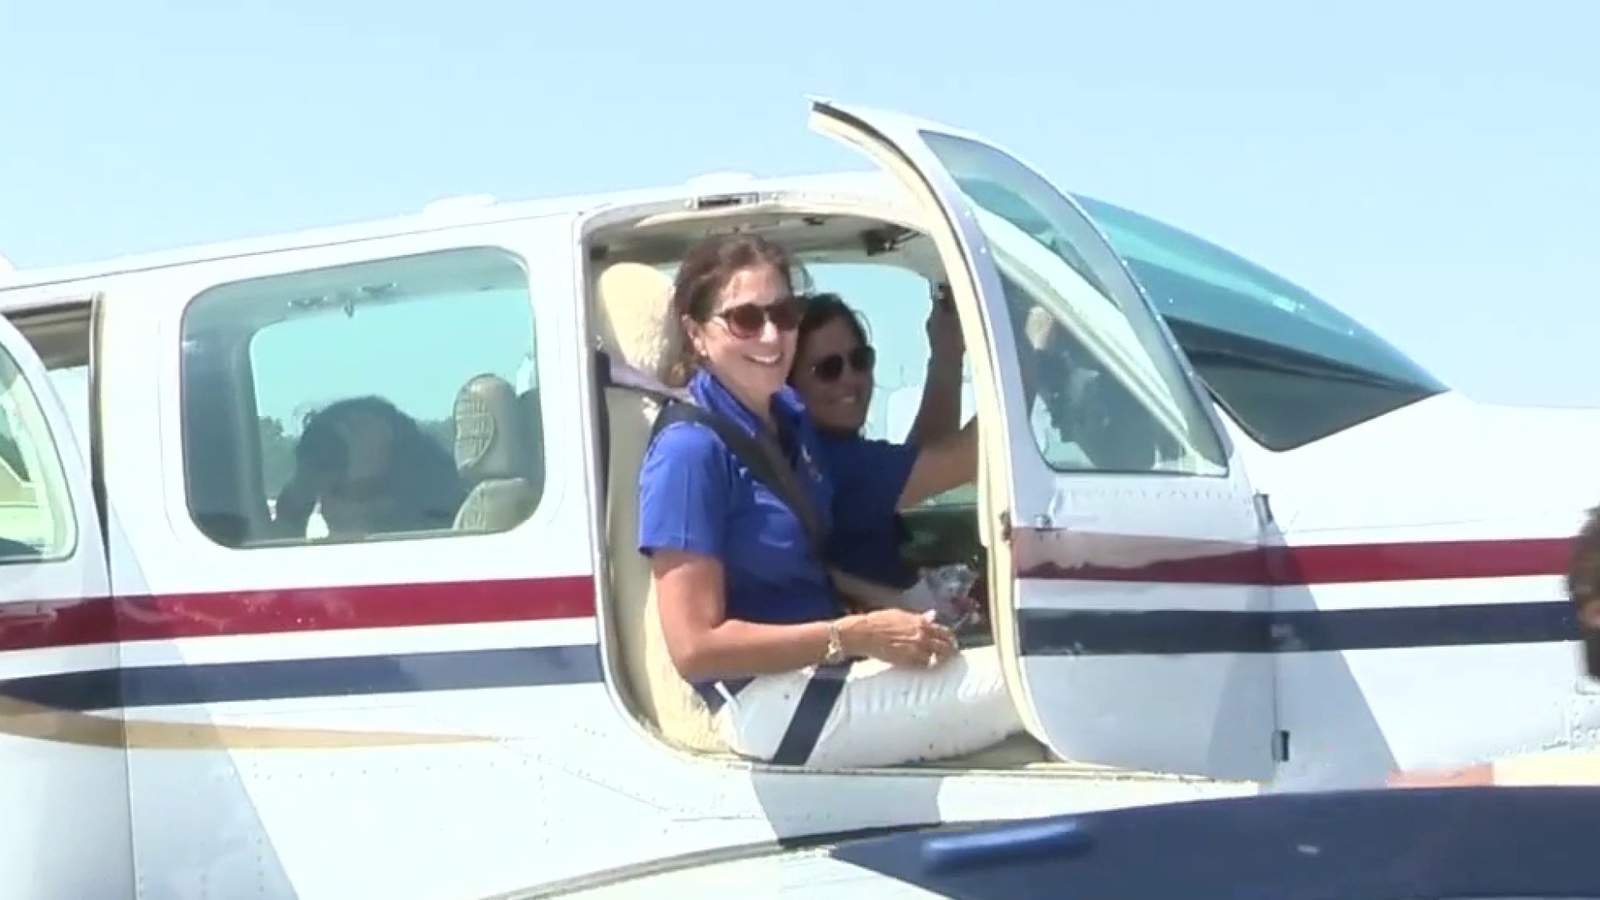 Female pilots fly over San Antonio in honor of 100th anniversary of women’s right to vote